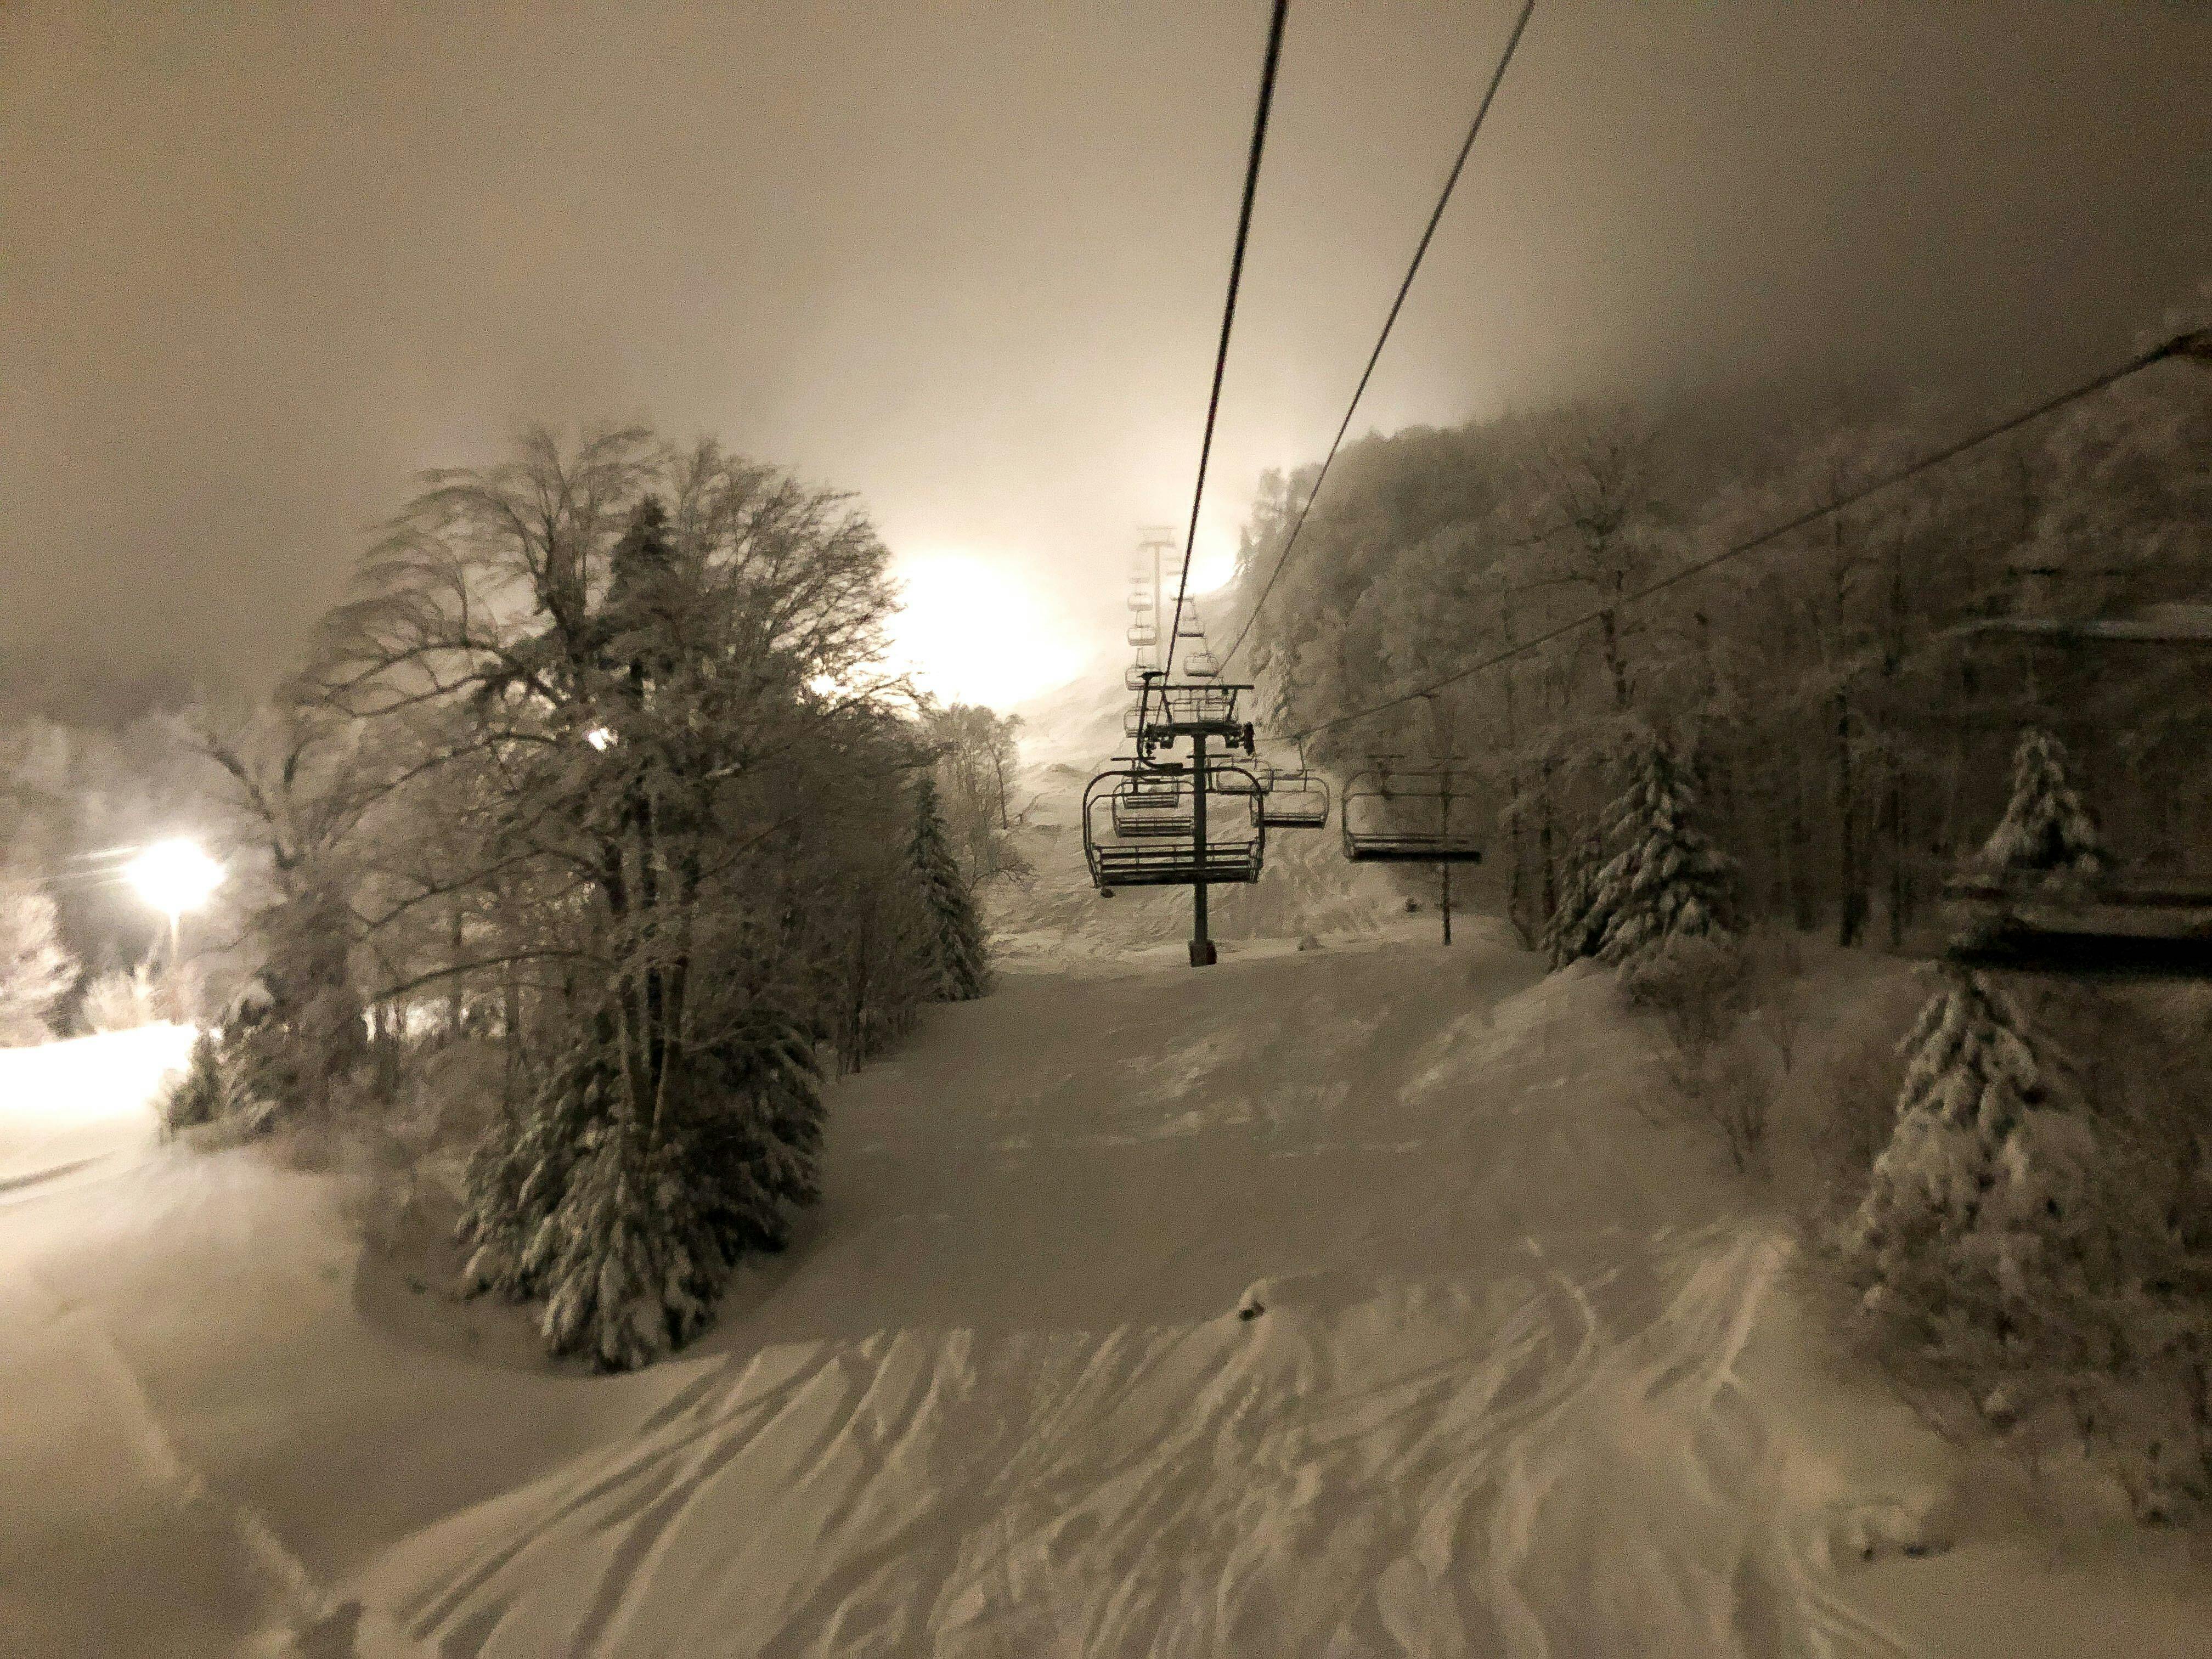 A chairlift over a lit up ski slope at night.